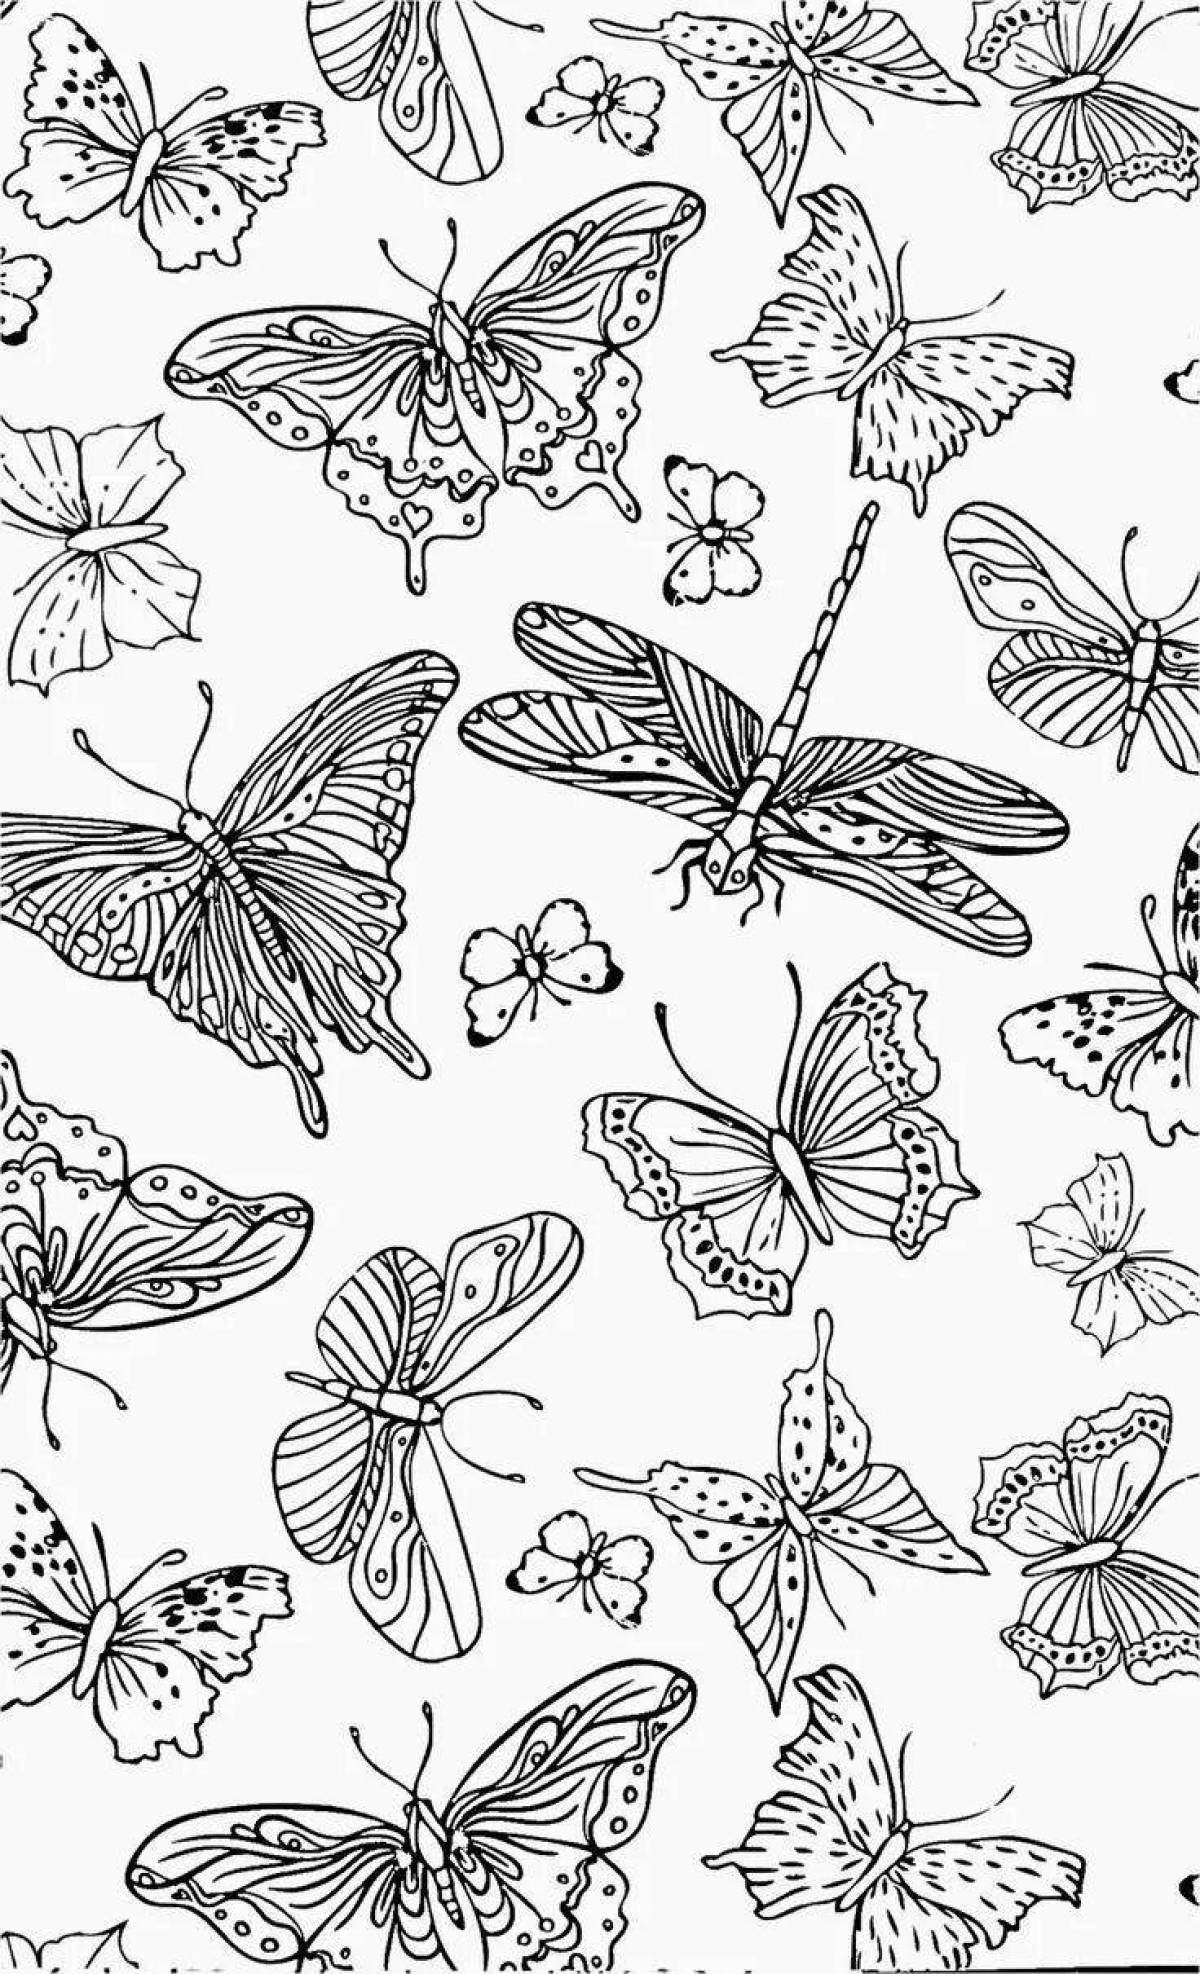 Adorable butterfly coloring pages